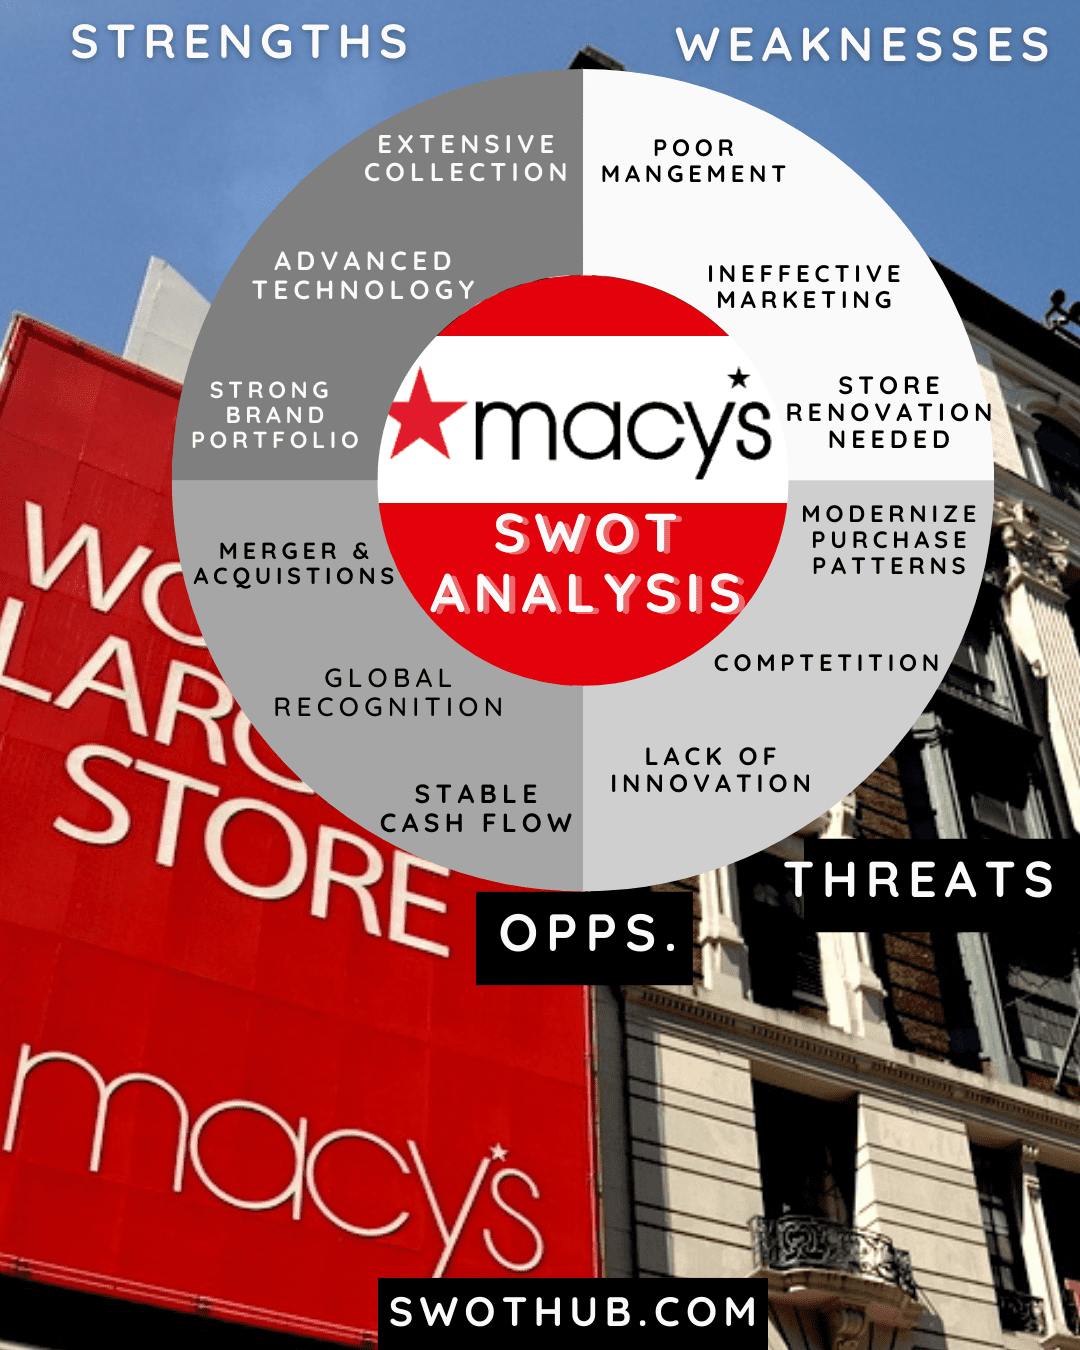 Macy's SWOT overview template